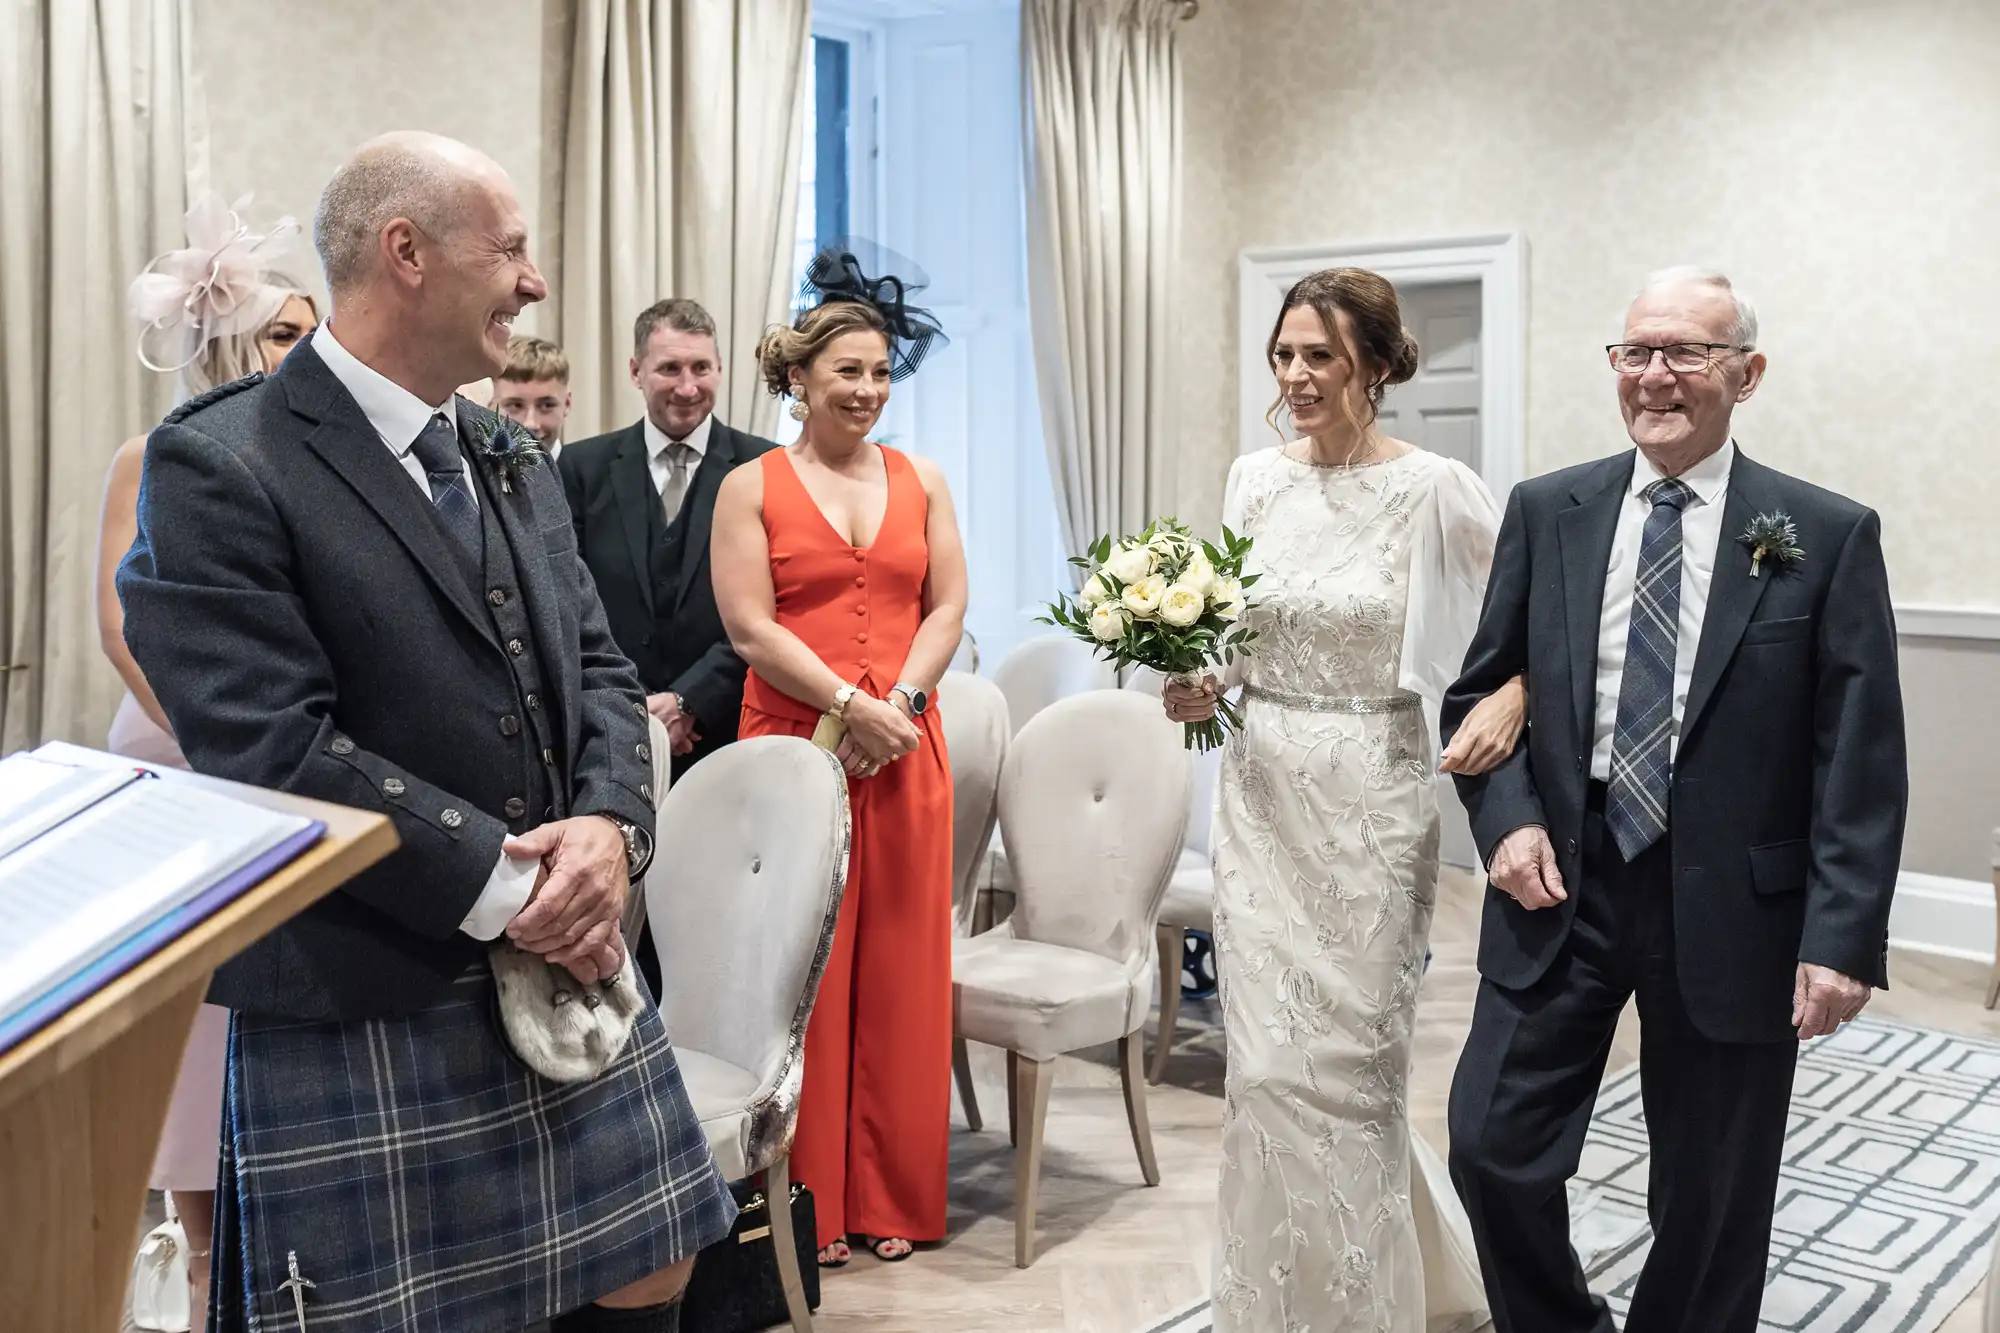 A bride, holding a bouquet, walks down the aisle with an older man. The groom, in a kilt, looks on happily. Wedding party members stand and watch.